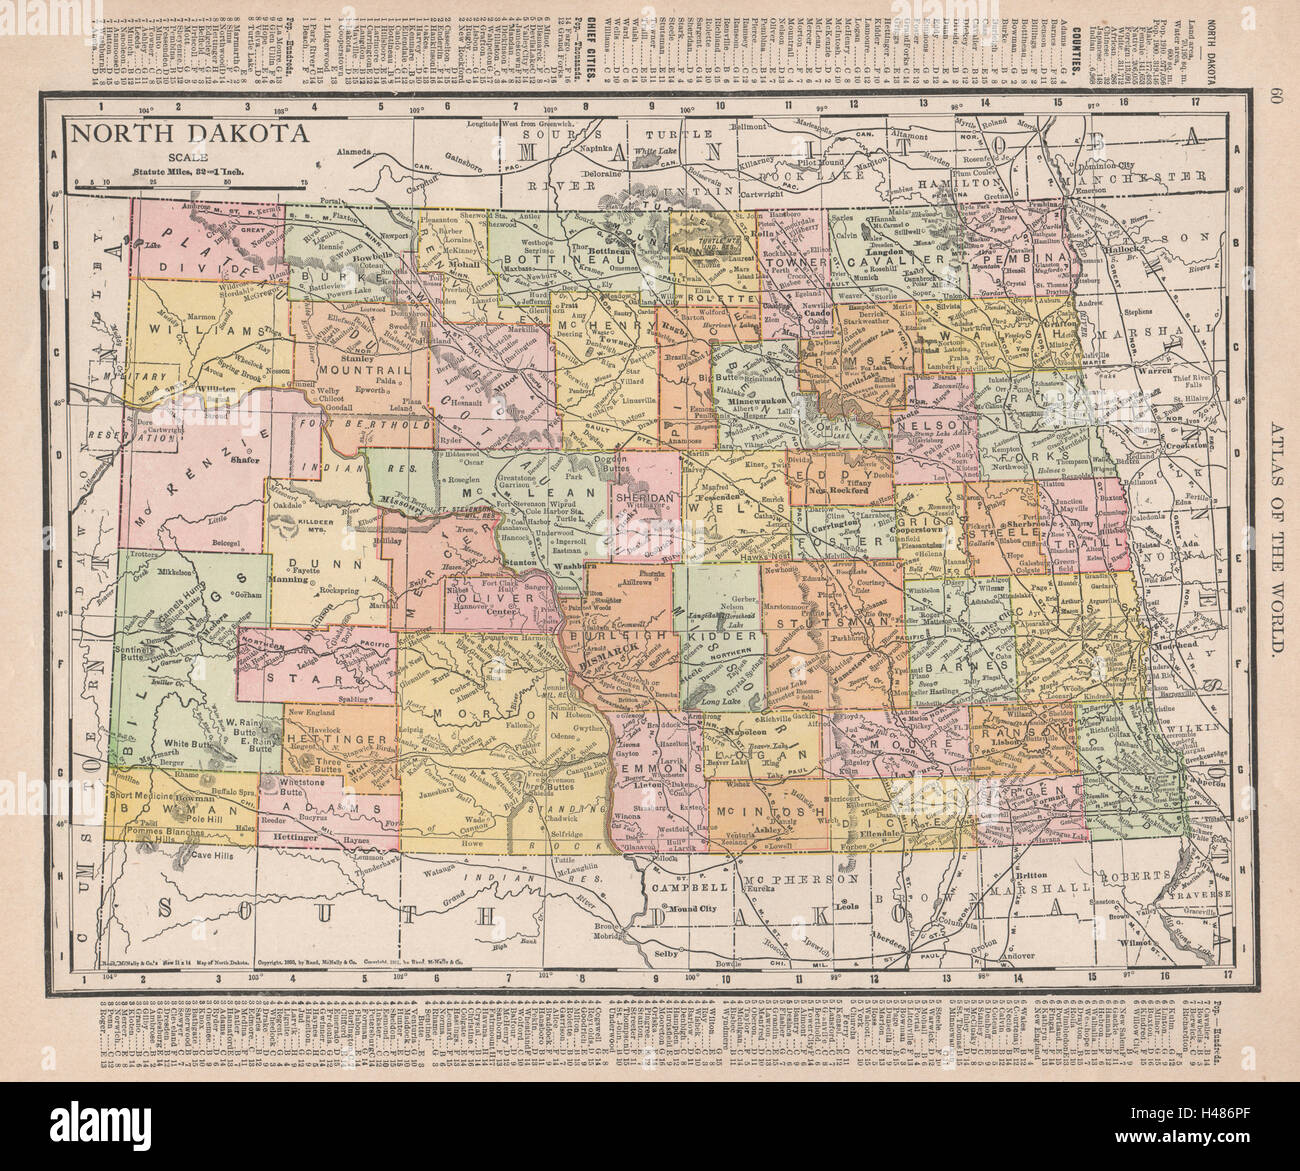 North Dakota state map showing counties. RAND MCNALLY 1912 old antique Stock Photo